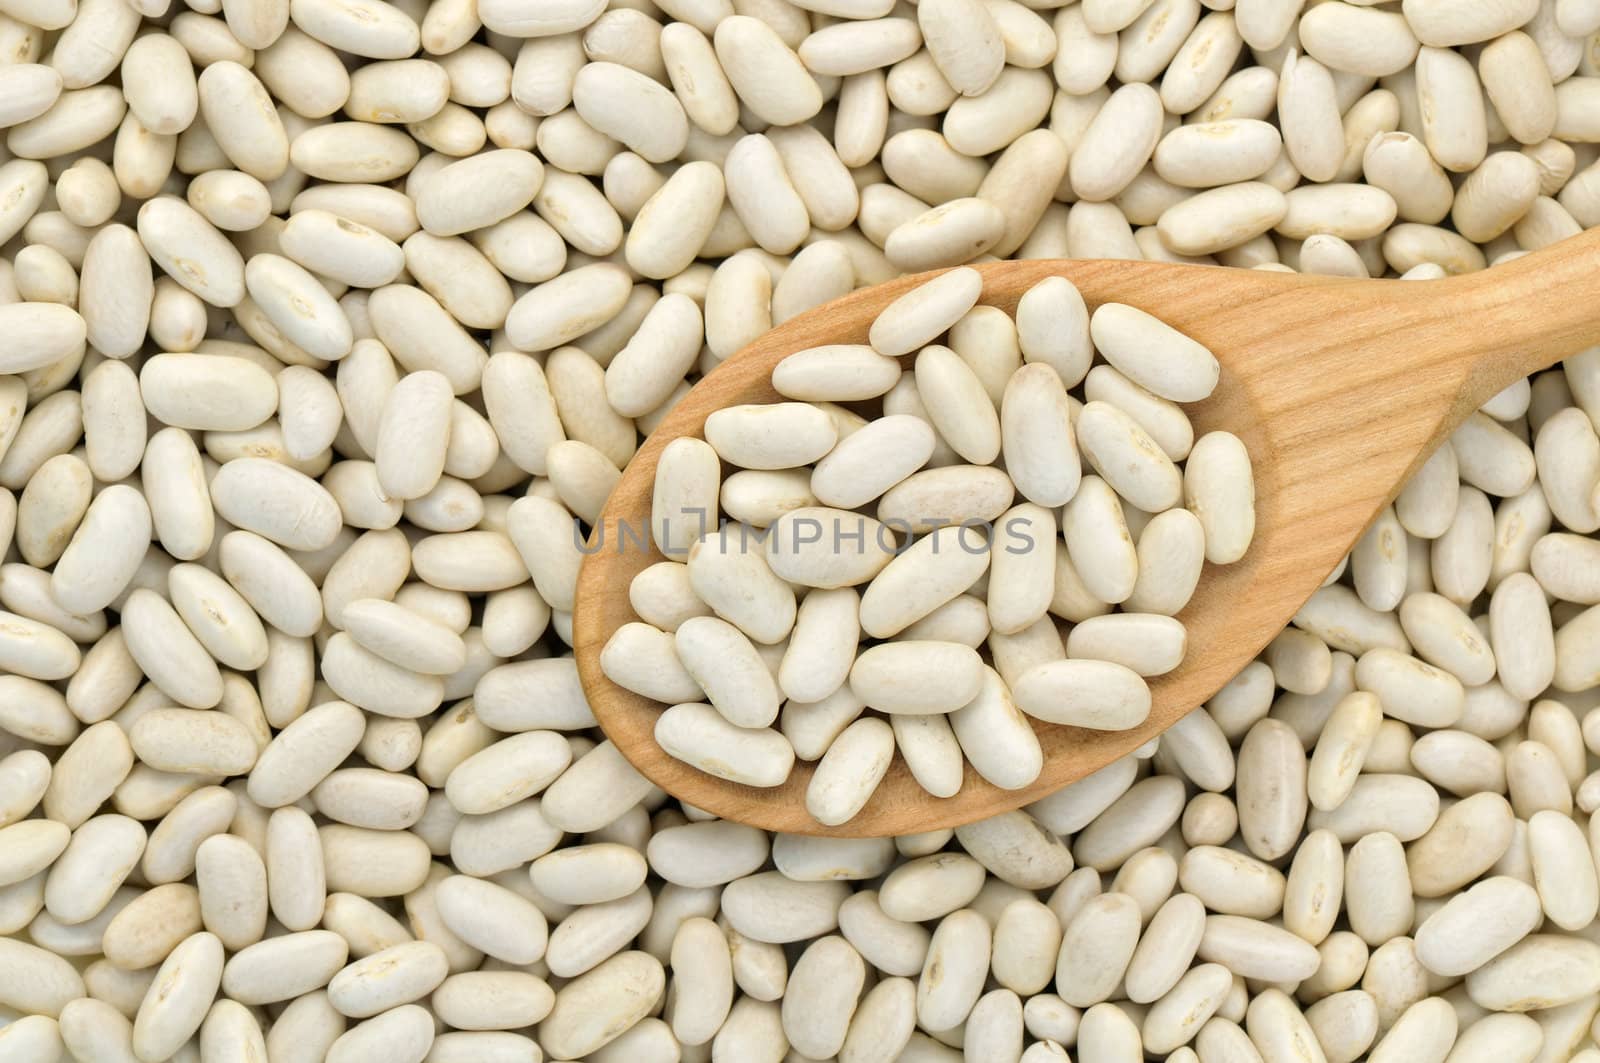 Wooden spoon filled with white beans in natural light